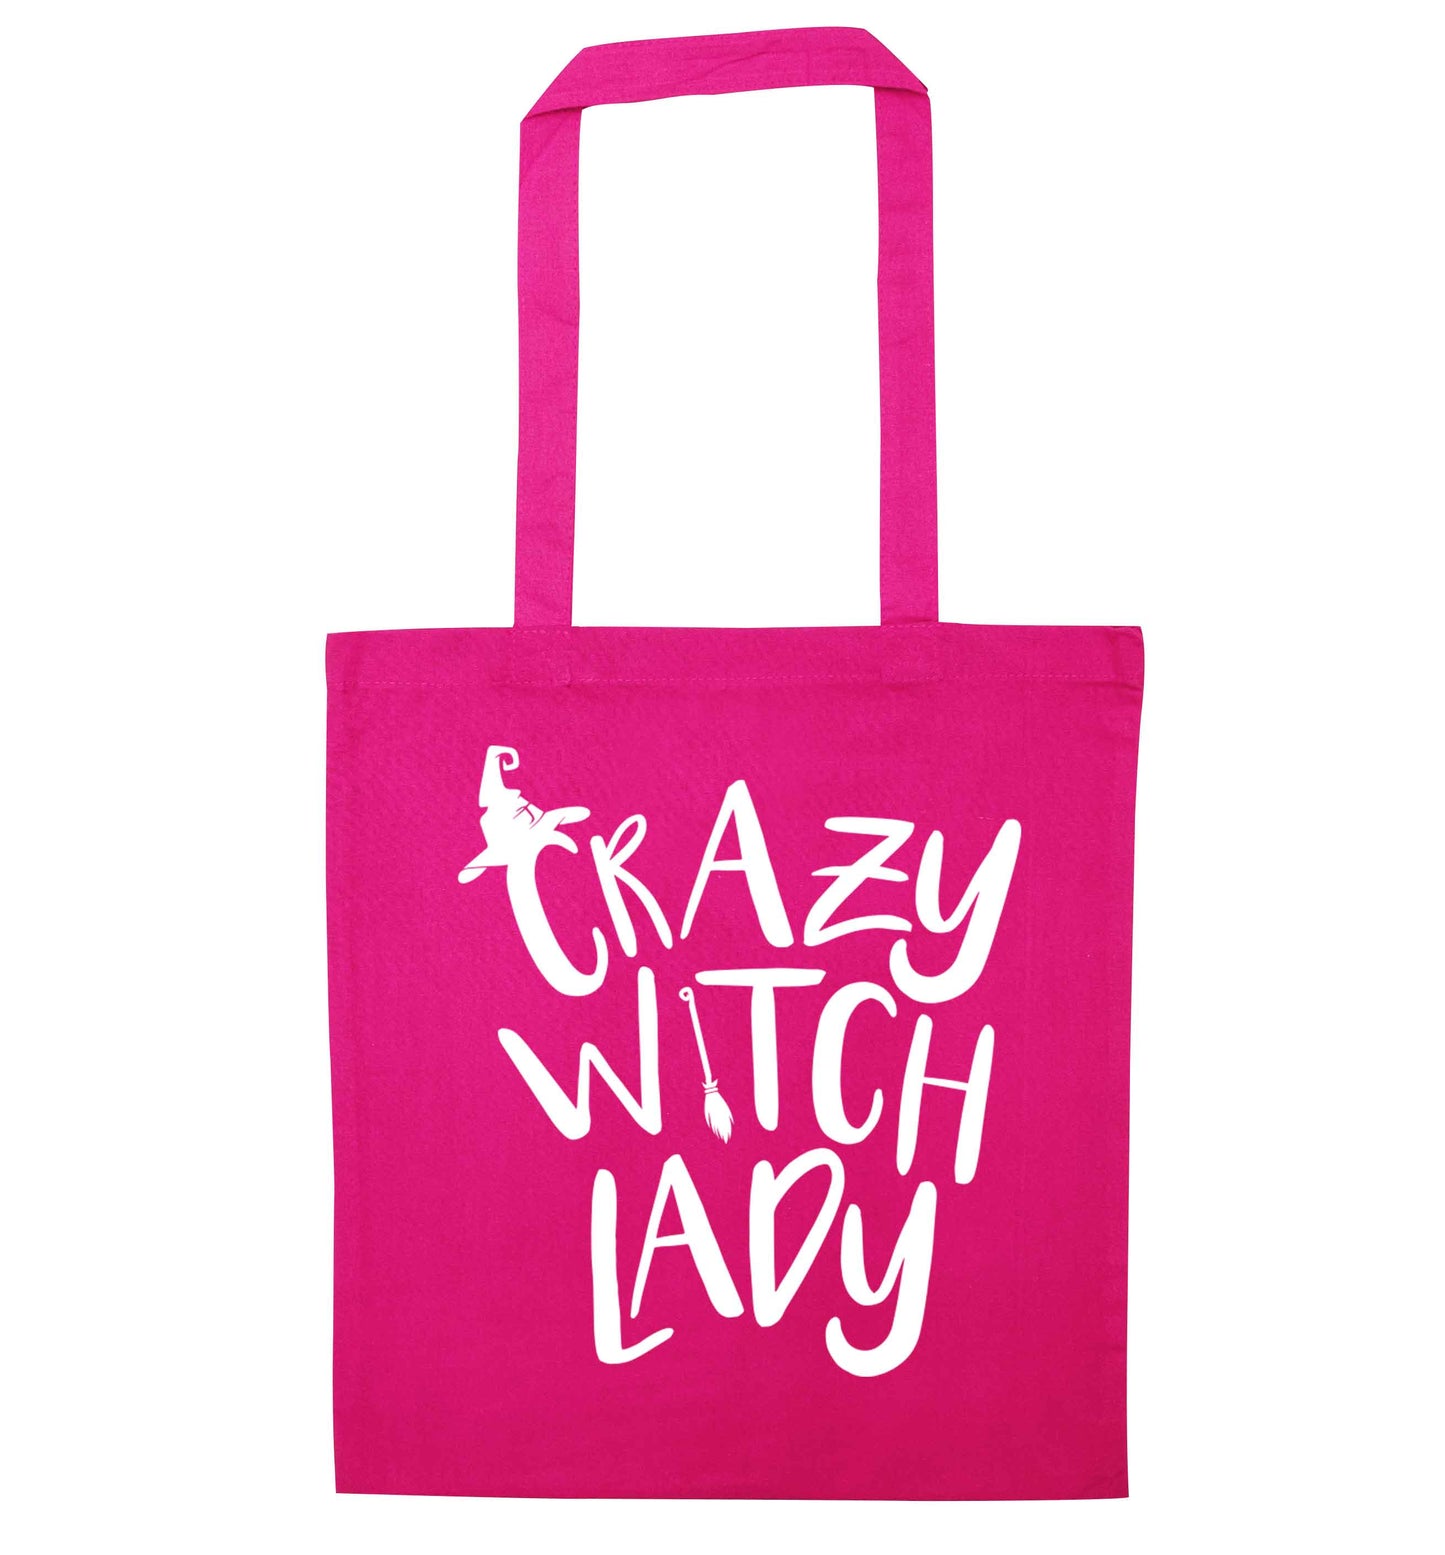 Crazy witch lady pink tote bag